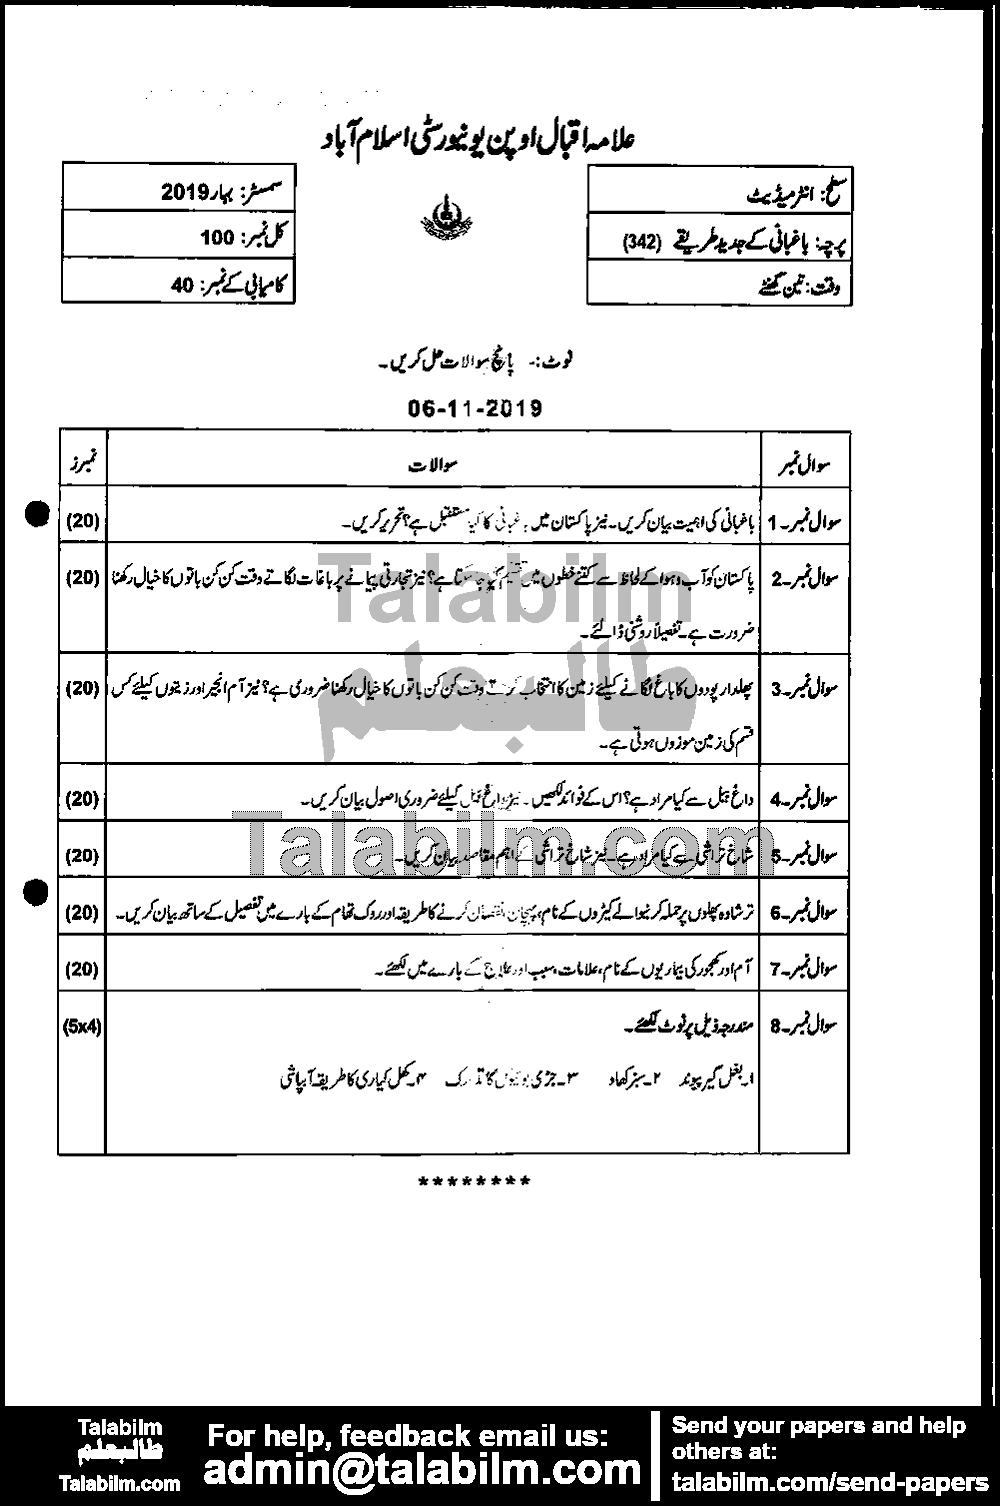 Baghbani Ky Amli Tareeqy 342 past paper for Spring 2019 Page No. 2